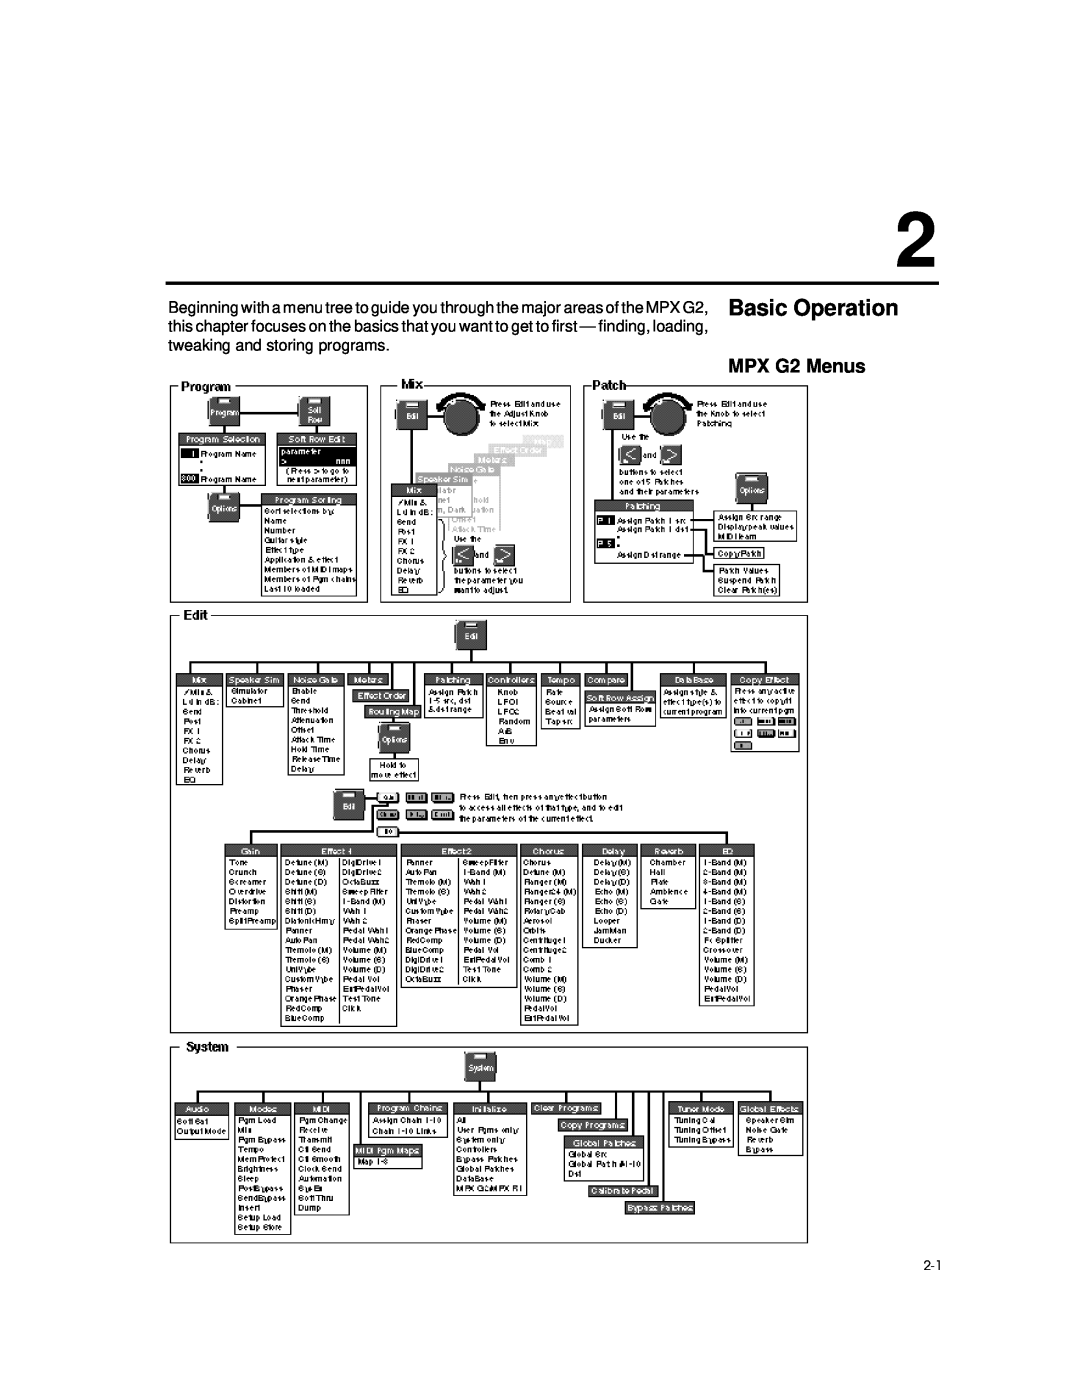 Lexicon manual MPX G2 Menus, tweaking and storing programs, Basic Operation 